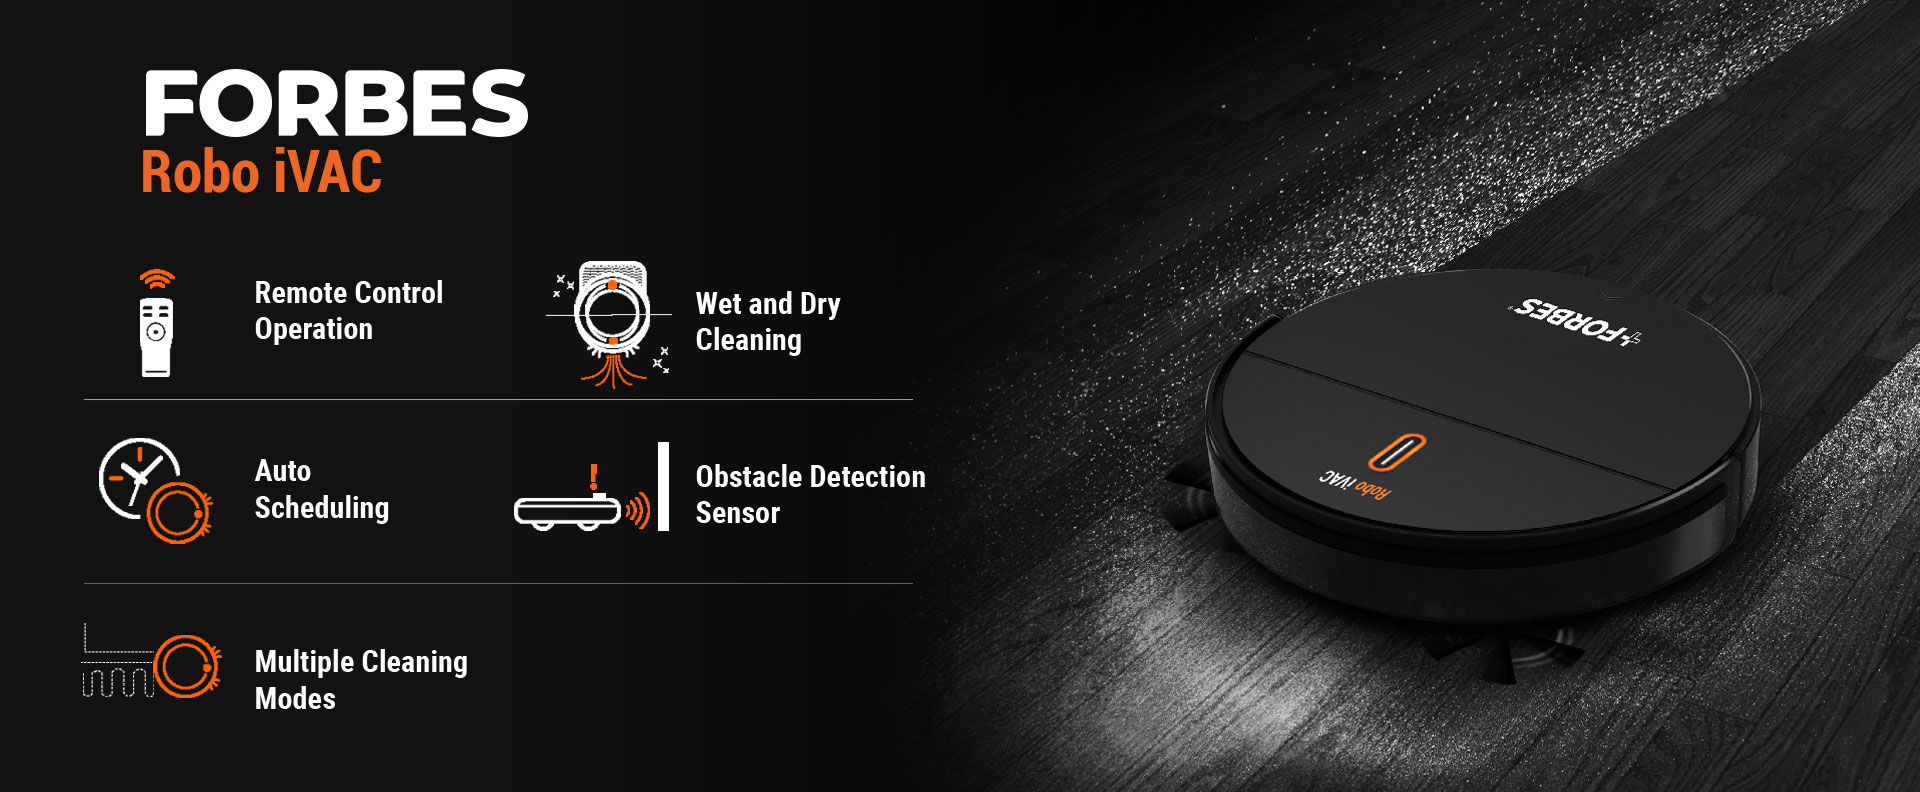 Remote Control Operation Wet and Dry Cleaning Auto Scheduling Obstacle Detection Sensor Multiple Cleaning Modes